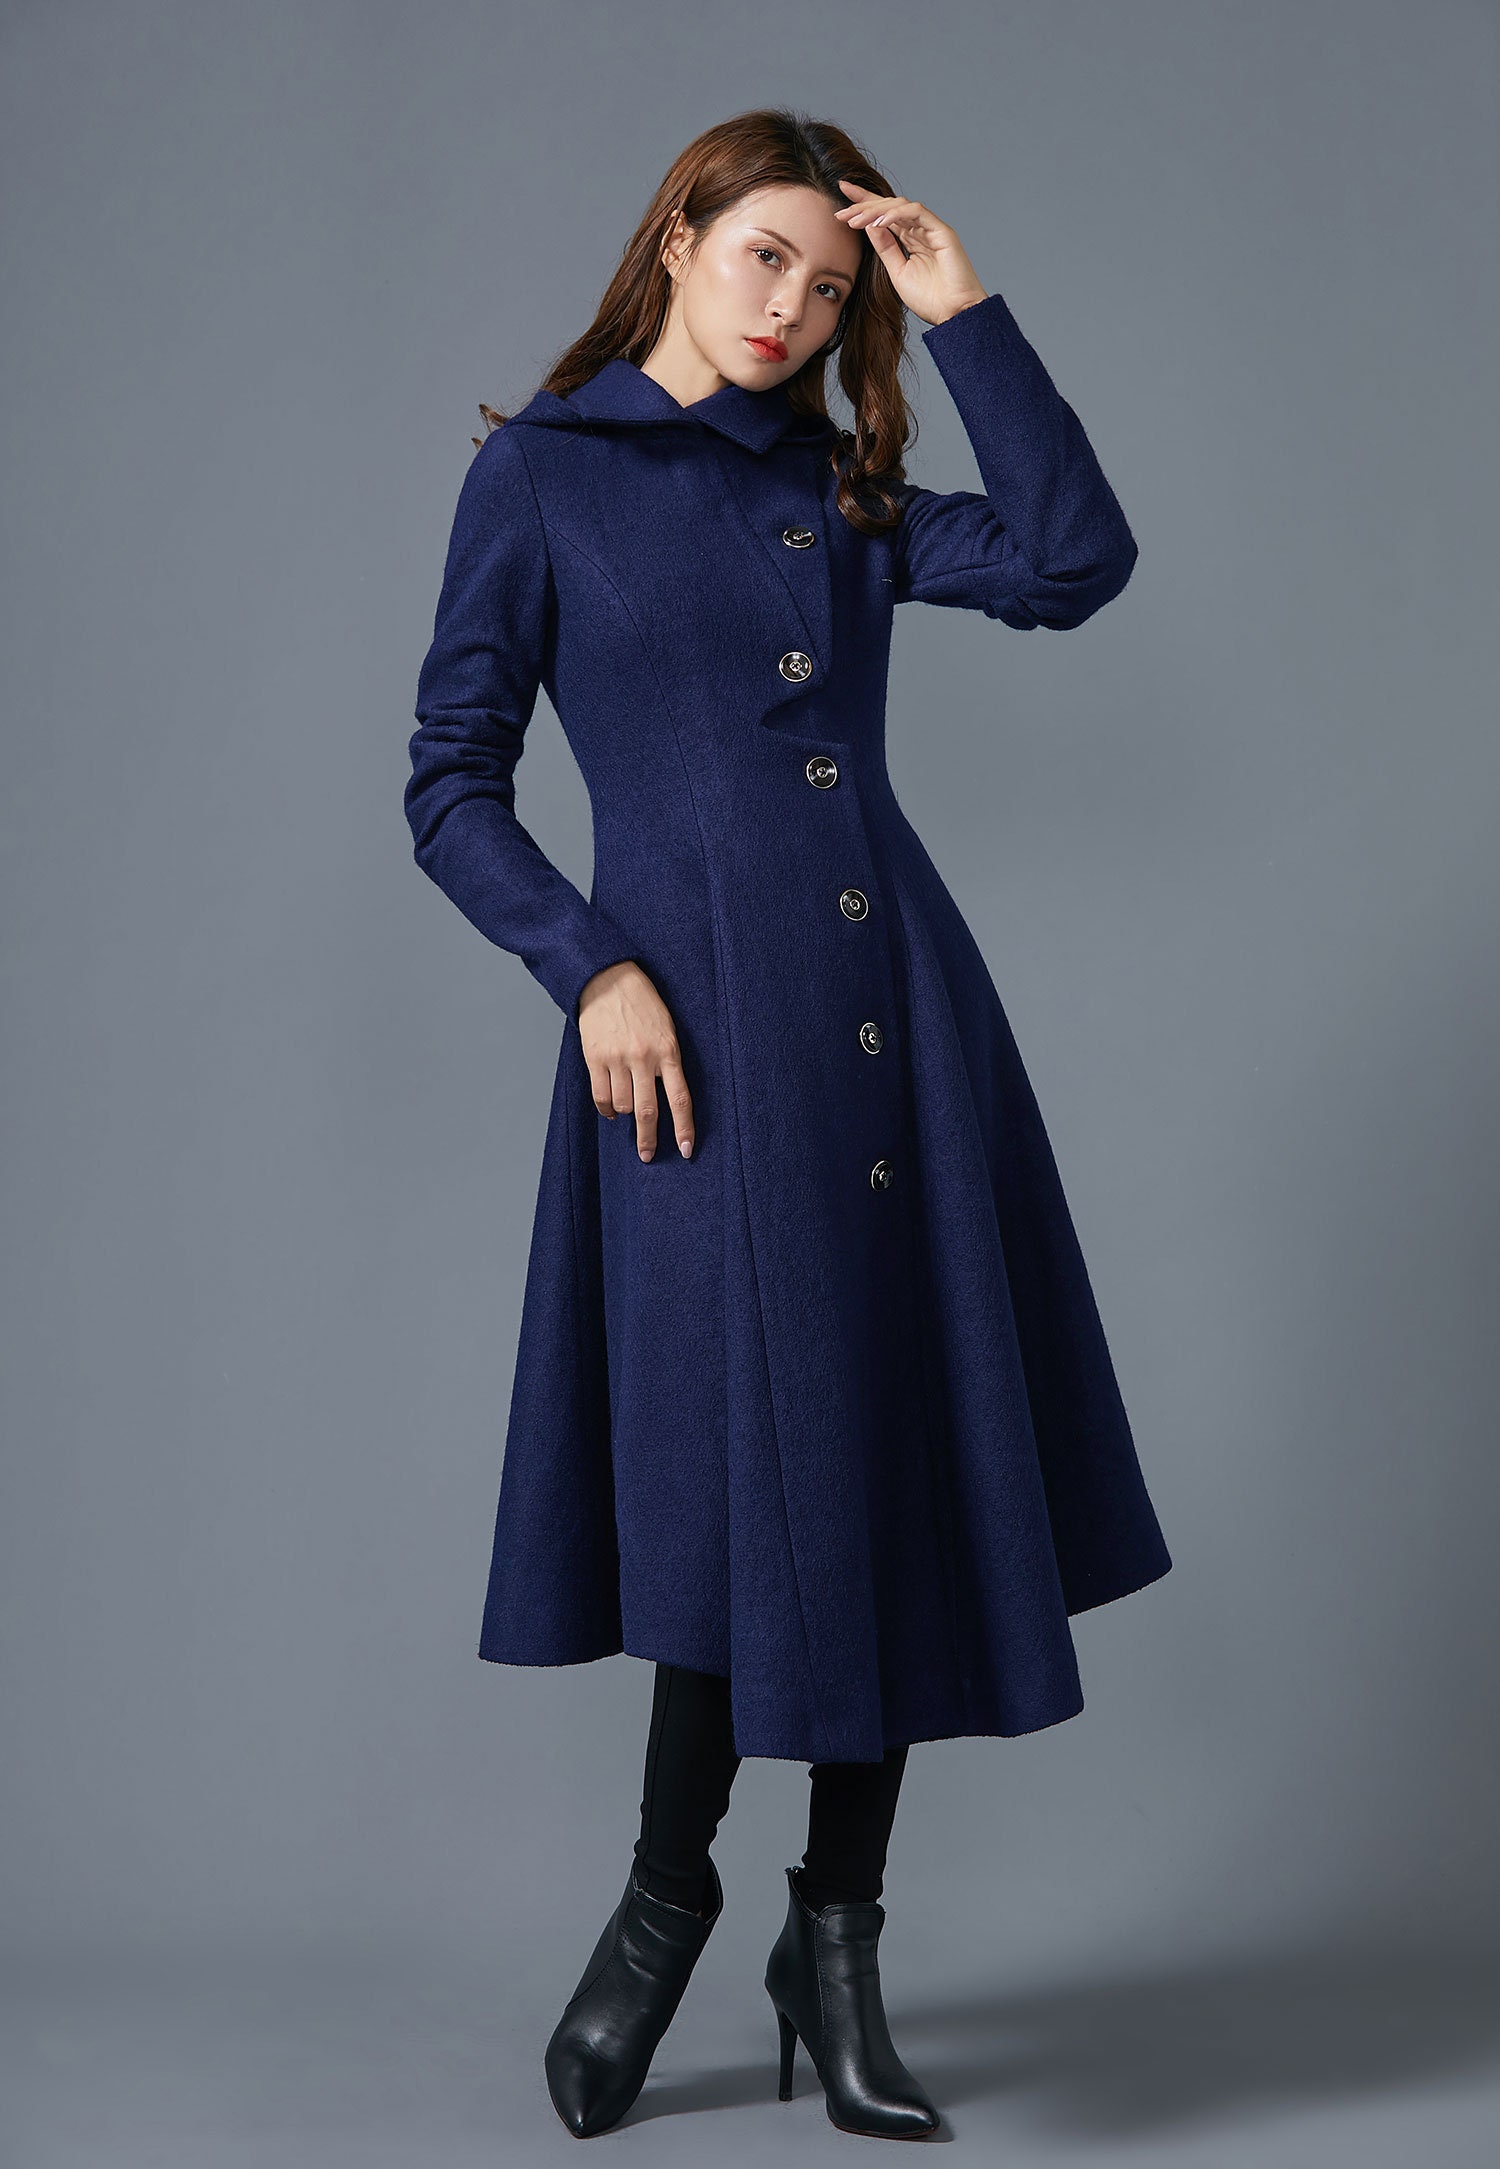 Navy Blue Winter Long Wool Coat Women, Fit and Flare Coat, Single Breasted  Coat, Warm Ladies Trench Coat, Designer Wool Coat Ylistyle C2566 